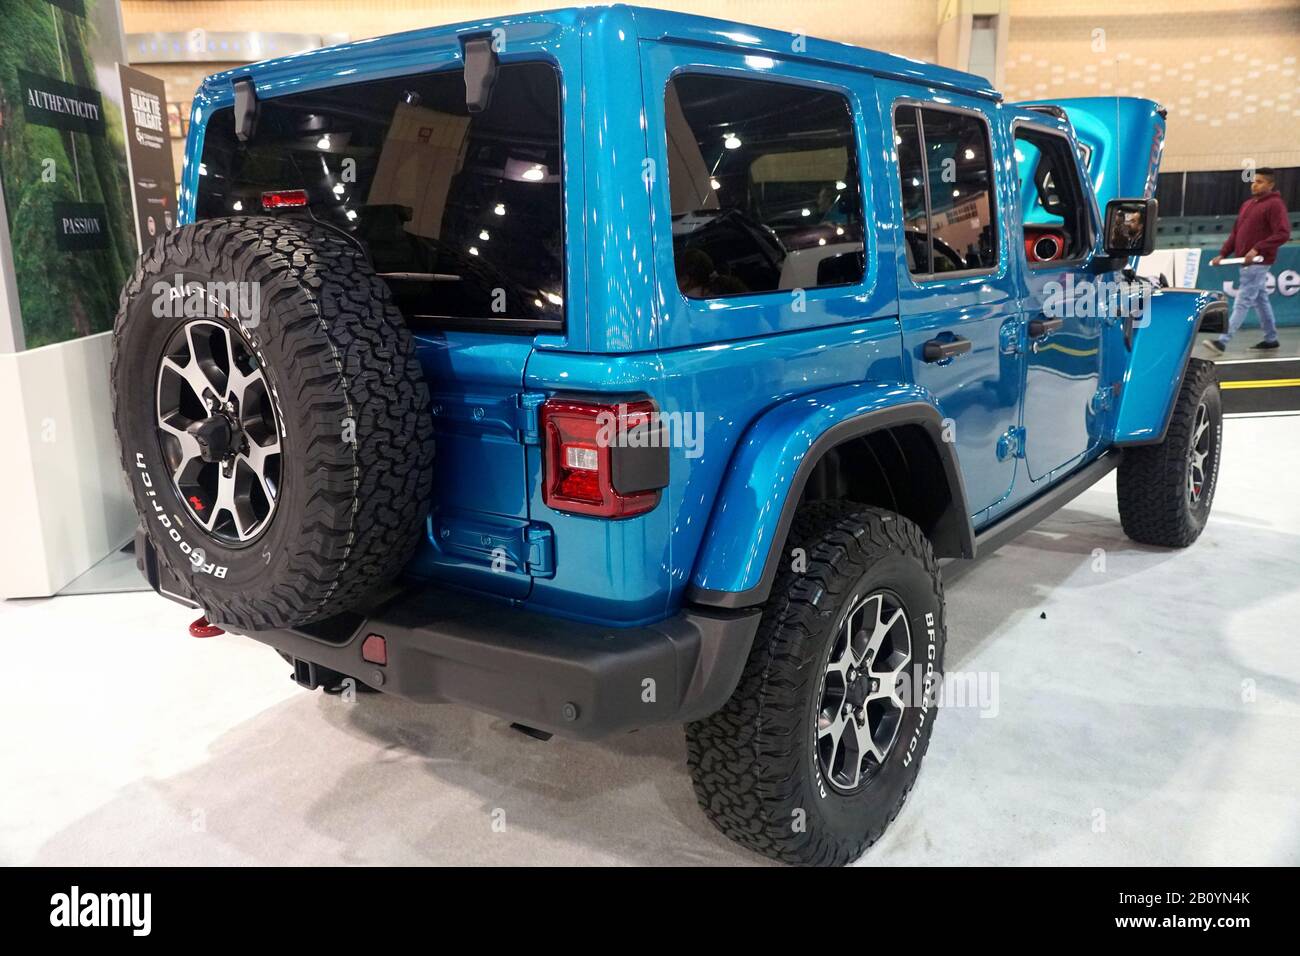 Philadelphia Pennsylvania U S A February 9 The Side View Of The Jeep Wrangler Unlimited Rubicon 4x4 Blue Color Stock Photo Alamy